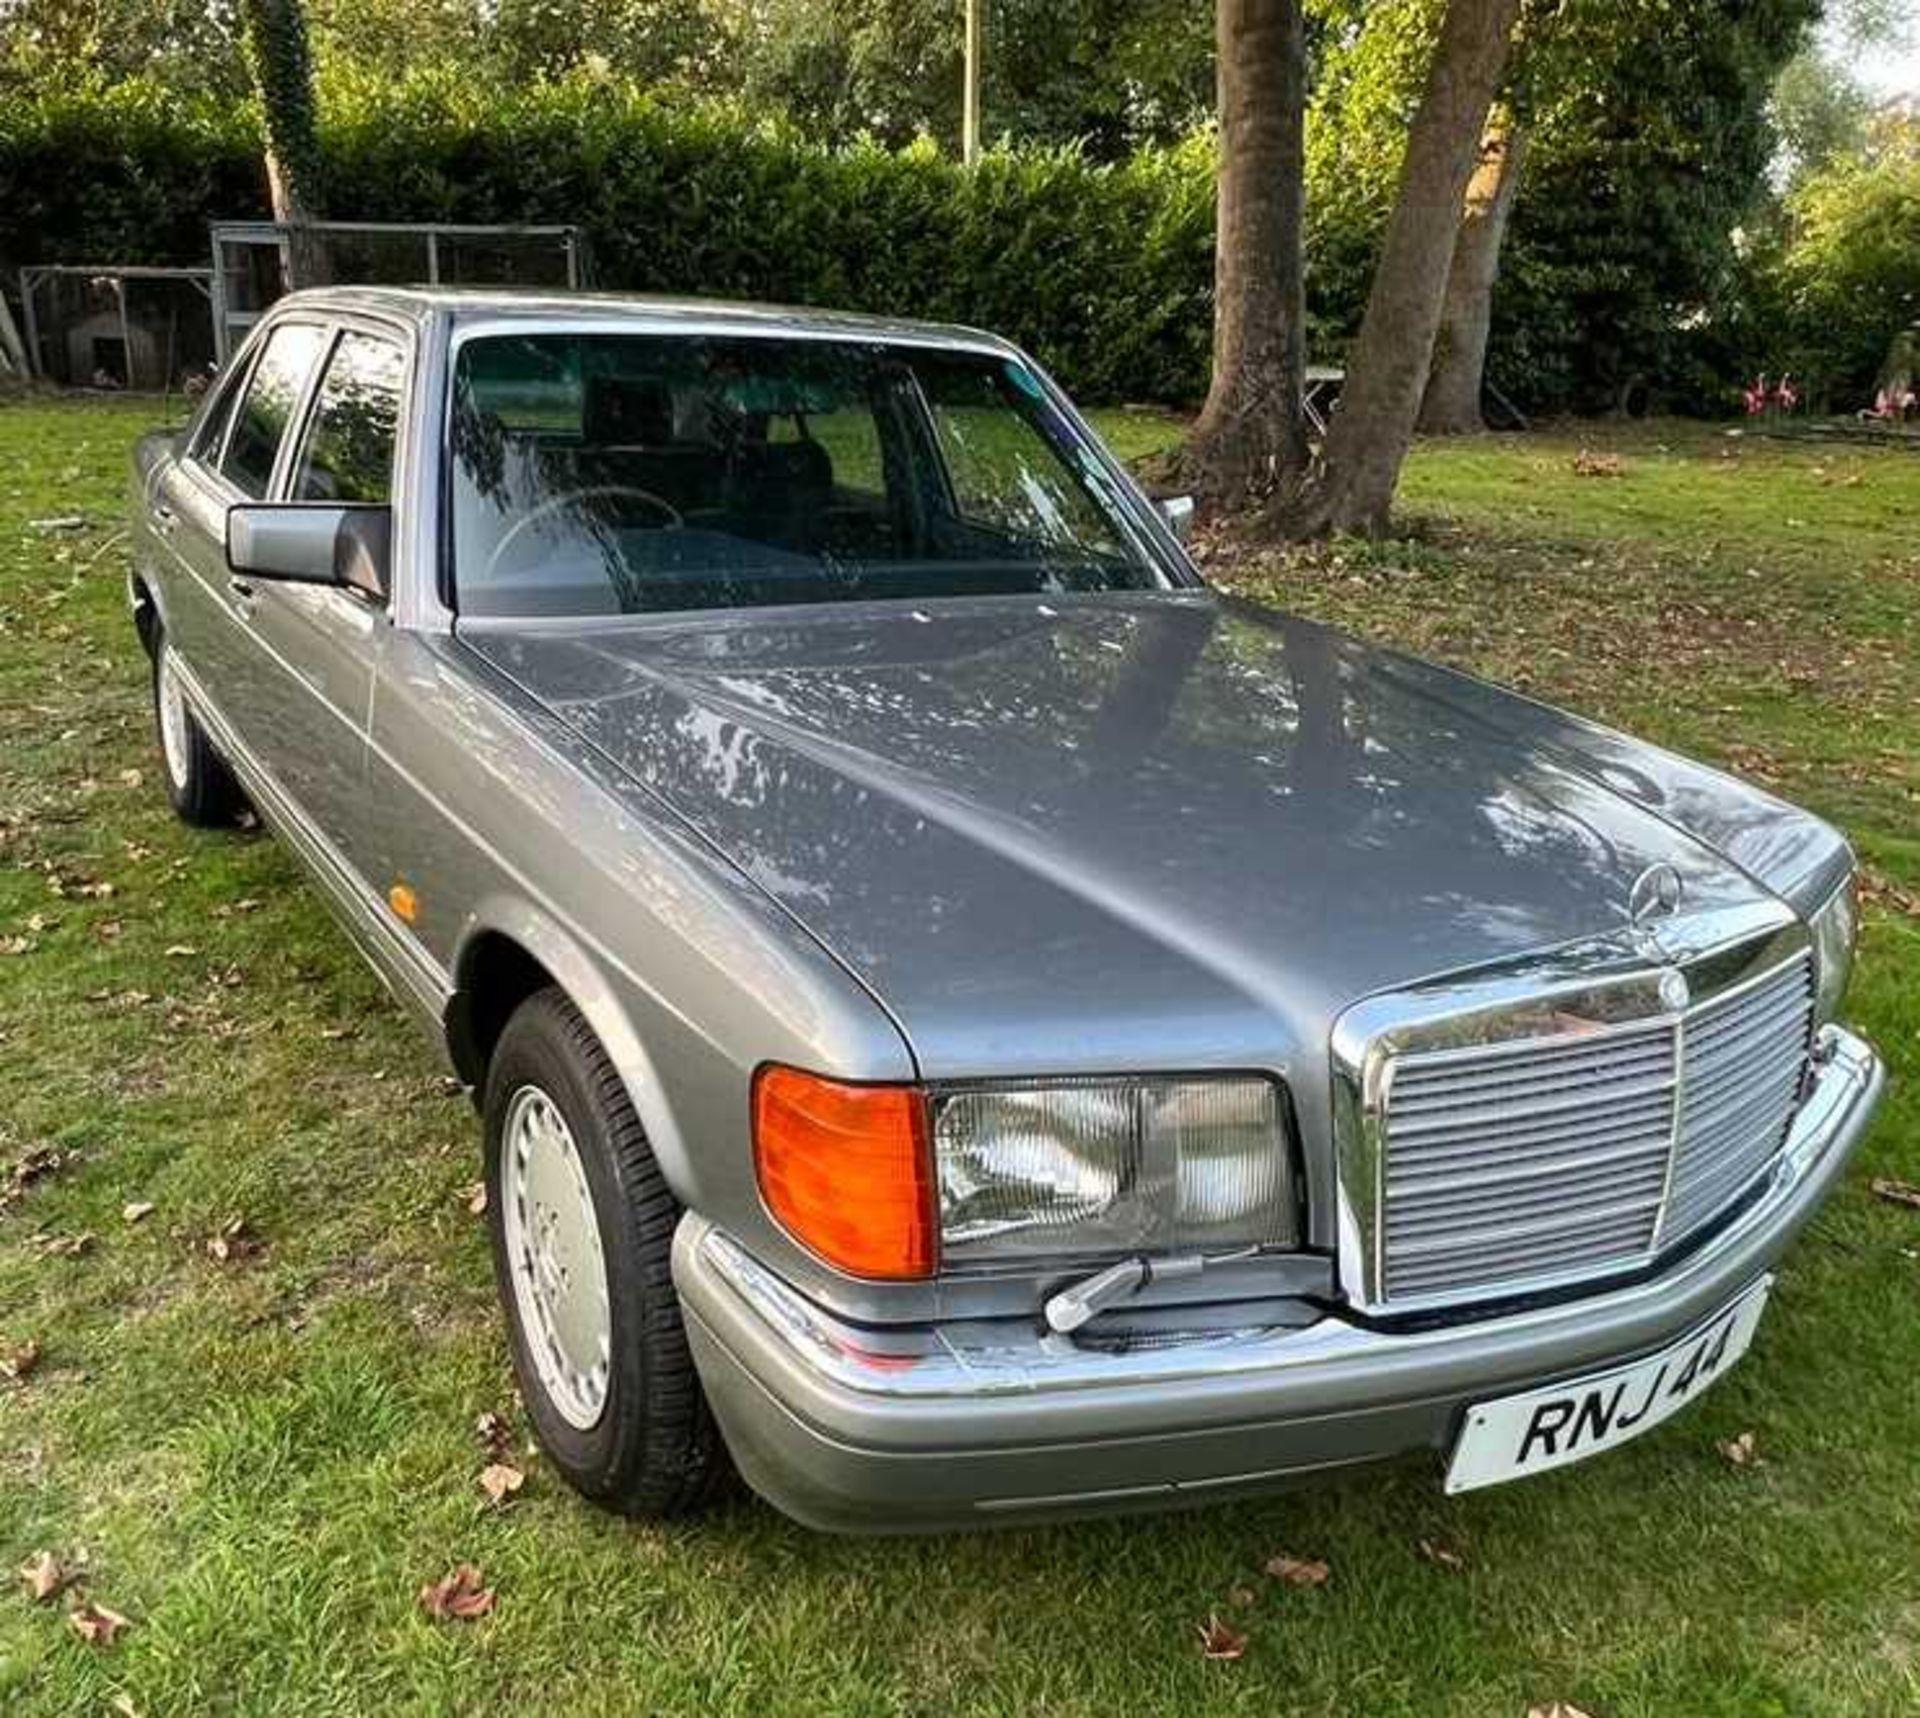 A 1988 Mercedes Benz 420SE in metallic grey Registration RNJ 44 (Note that this private registration